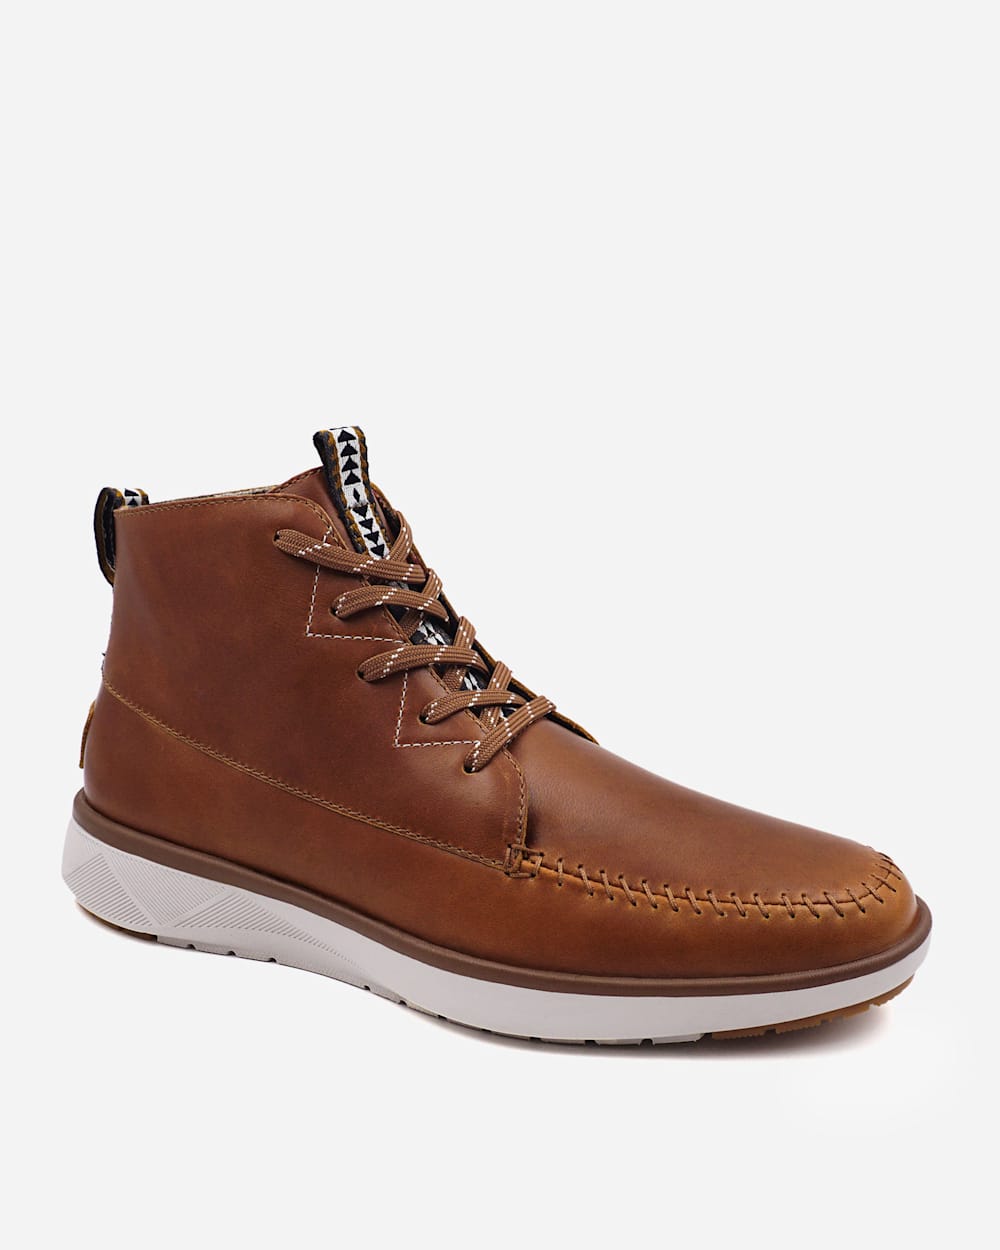 ALTERNATE VIEW OF MEN'S NUEVO POINT SNEAKER BOOTS IN CARAMEL CAFE image number 2